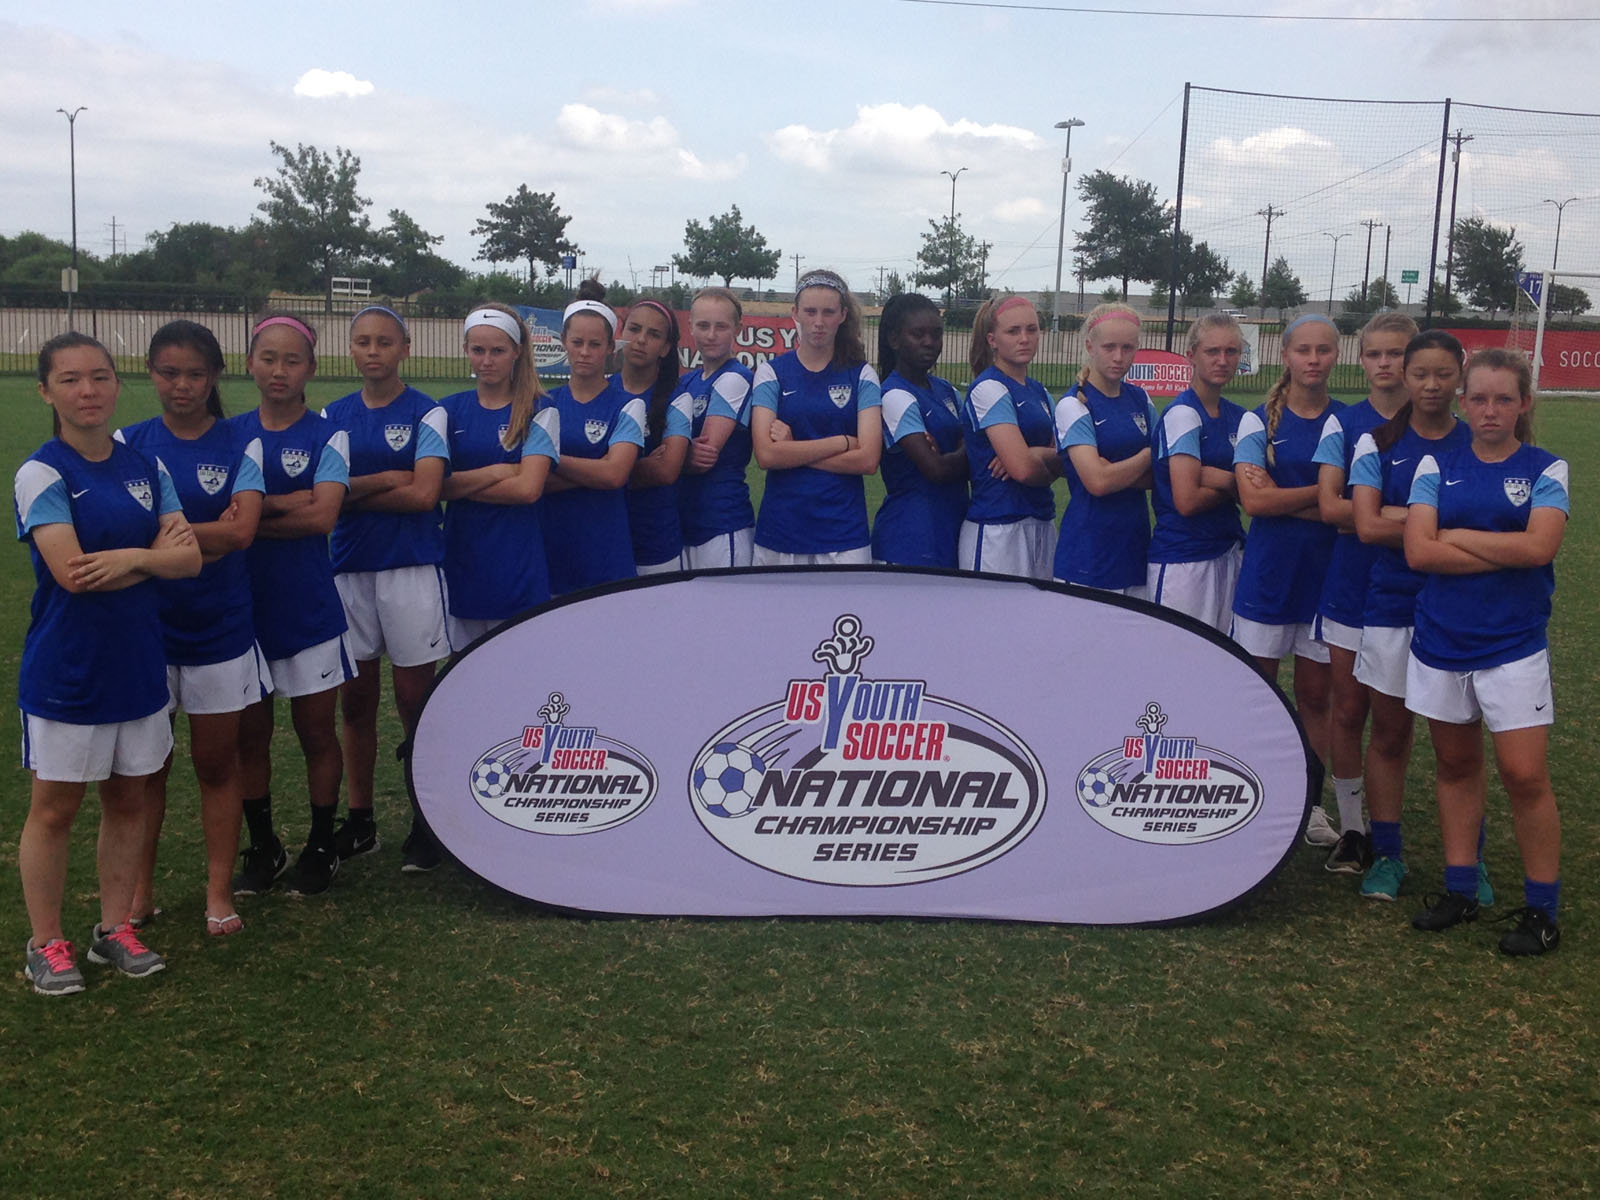 BRYC 01 Elite, ready for battle before the US Youth Soccer National Championship Series U14 semifinal game.